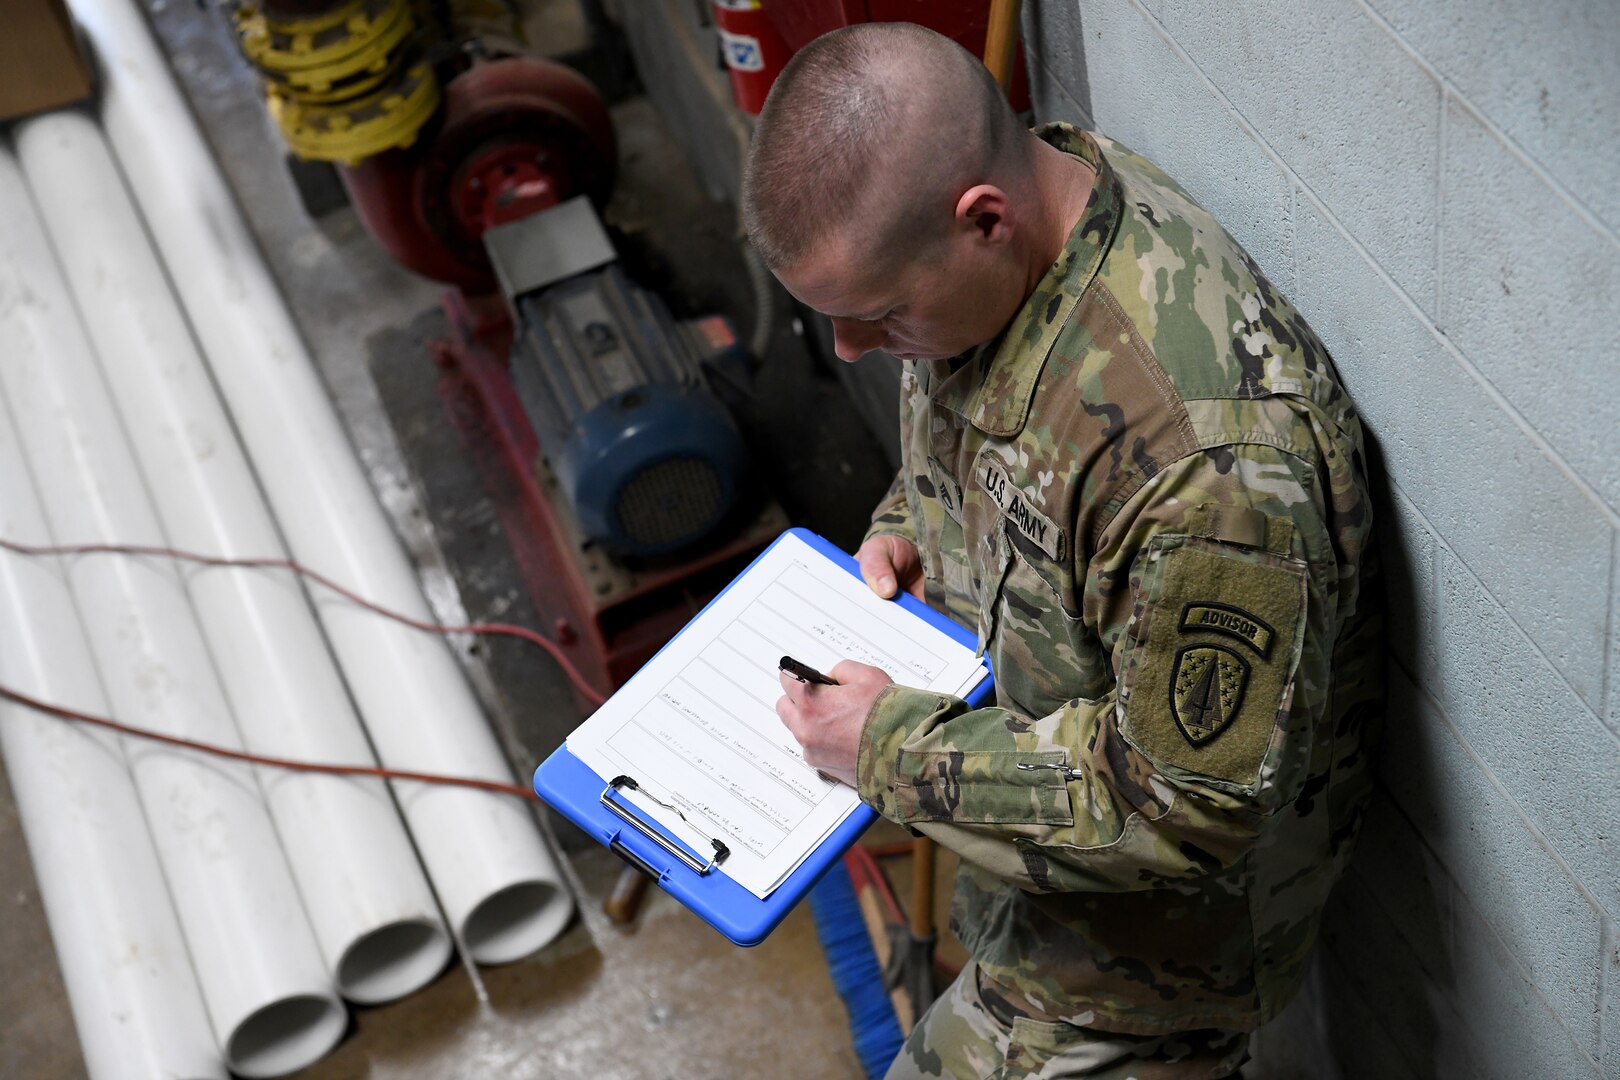 U.S. Army Staff Sgt. Lucas Budd, an engineer adviser assigned to the Northwest Joint Engineer Assessment Team, takes notes during a site survey April 4, 2020, at Upper Sandusky High School. Ohio National Guard members were assessing whether the school is suitable for use as an alternate medical facility, if COVID-19 cases increase beyond what existing hospitals in the state can manage.